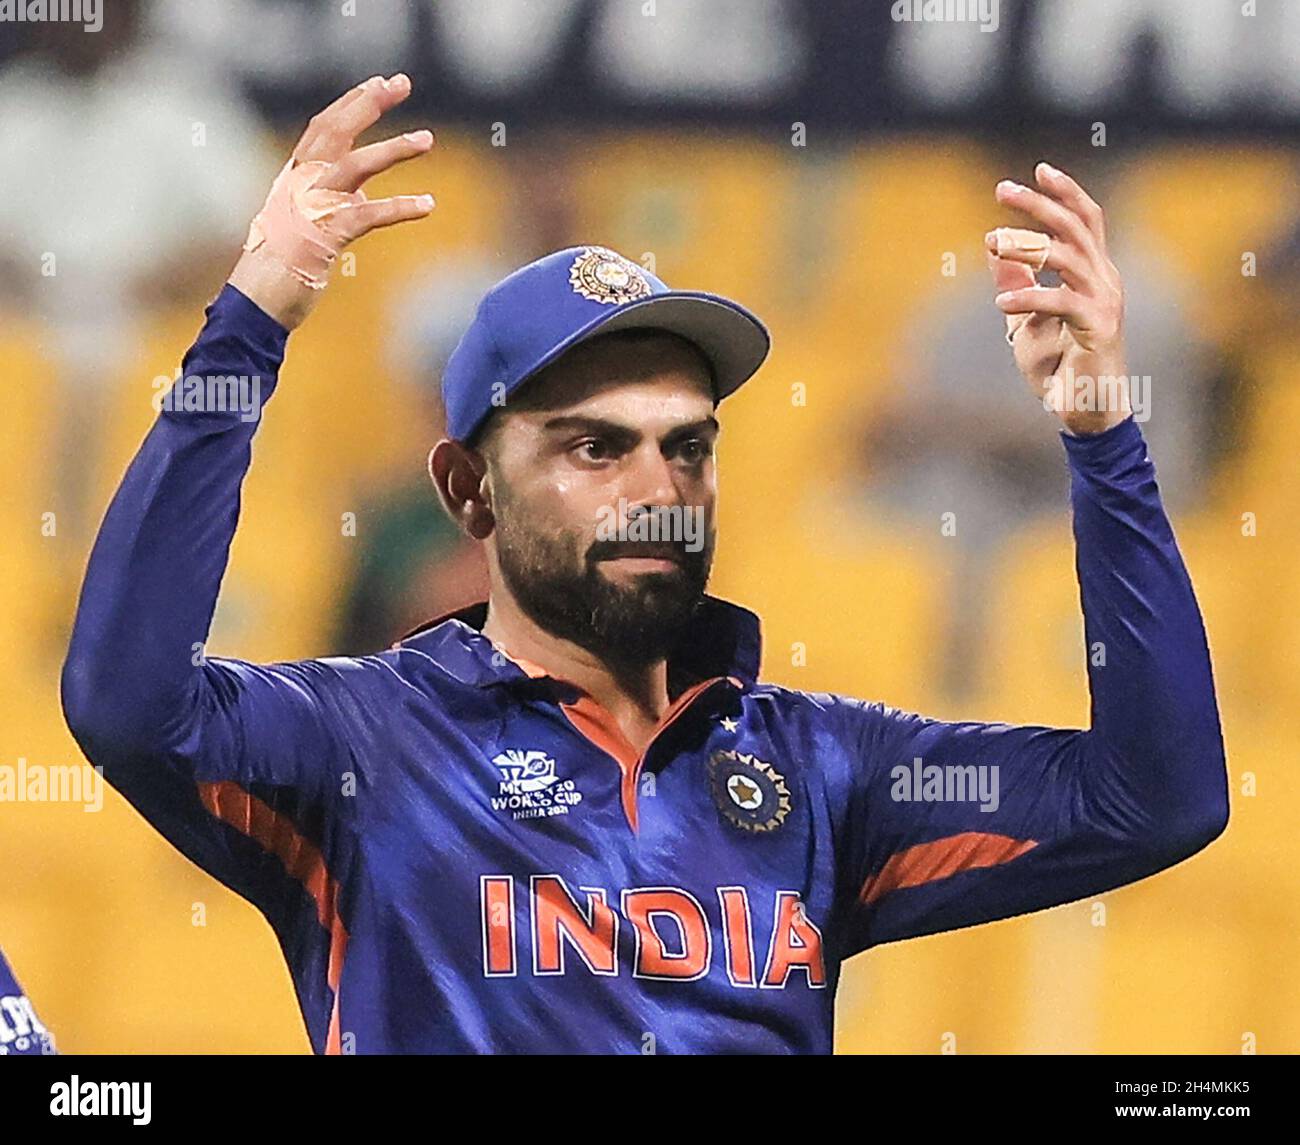 Abudhabi, UAE, Nov 3, 2021 ICC T20 WORLD CUP India Vs Afganistan Virat Kohli gestures after the victory against Afganistan by 66 runs during ICC Cricket T20 World Cup